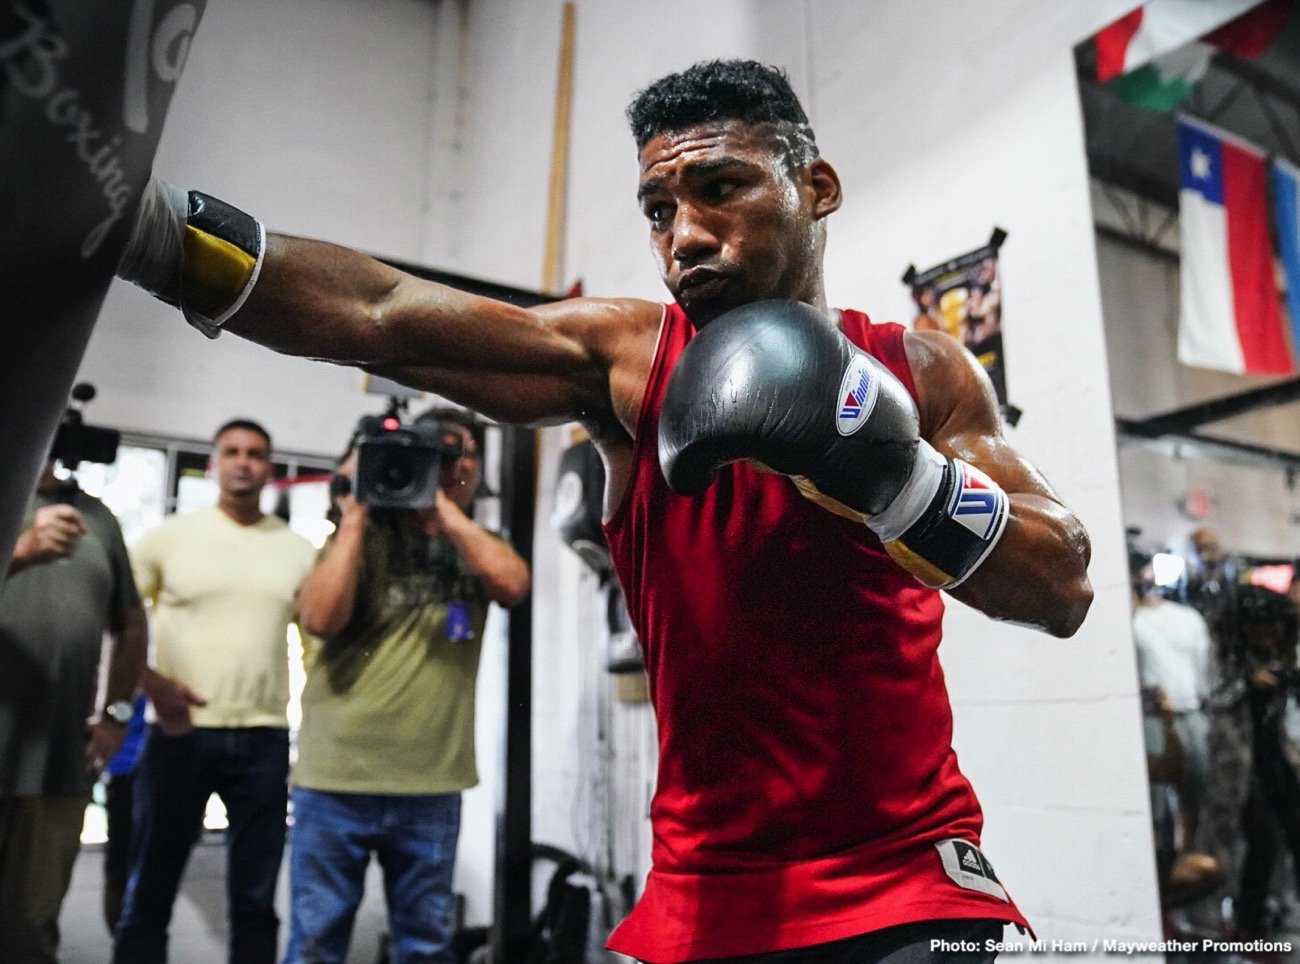 Image: Haney vs. Gamboa - Can Yuriorkis pull off an upset on Saturday?